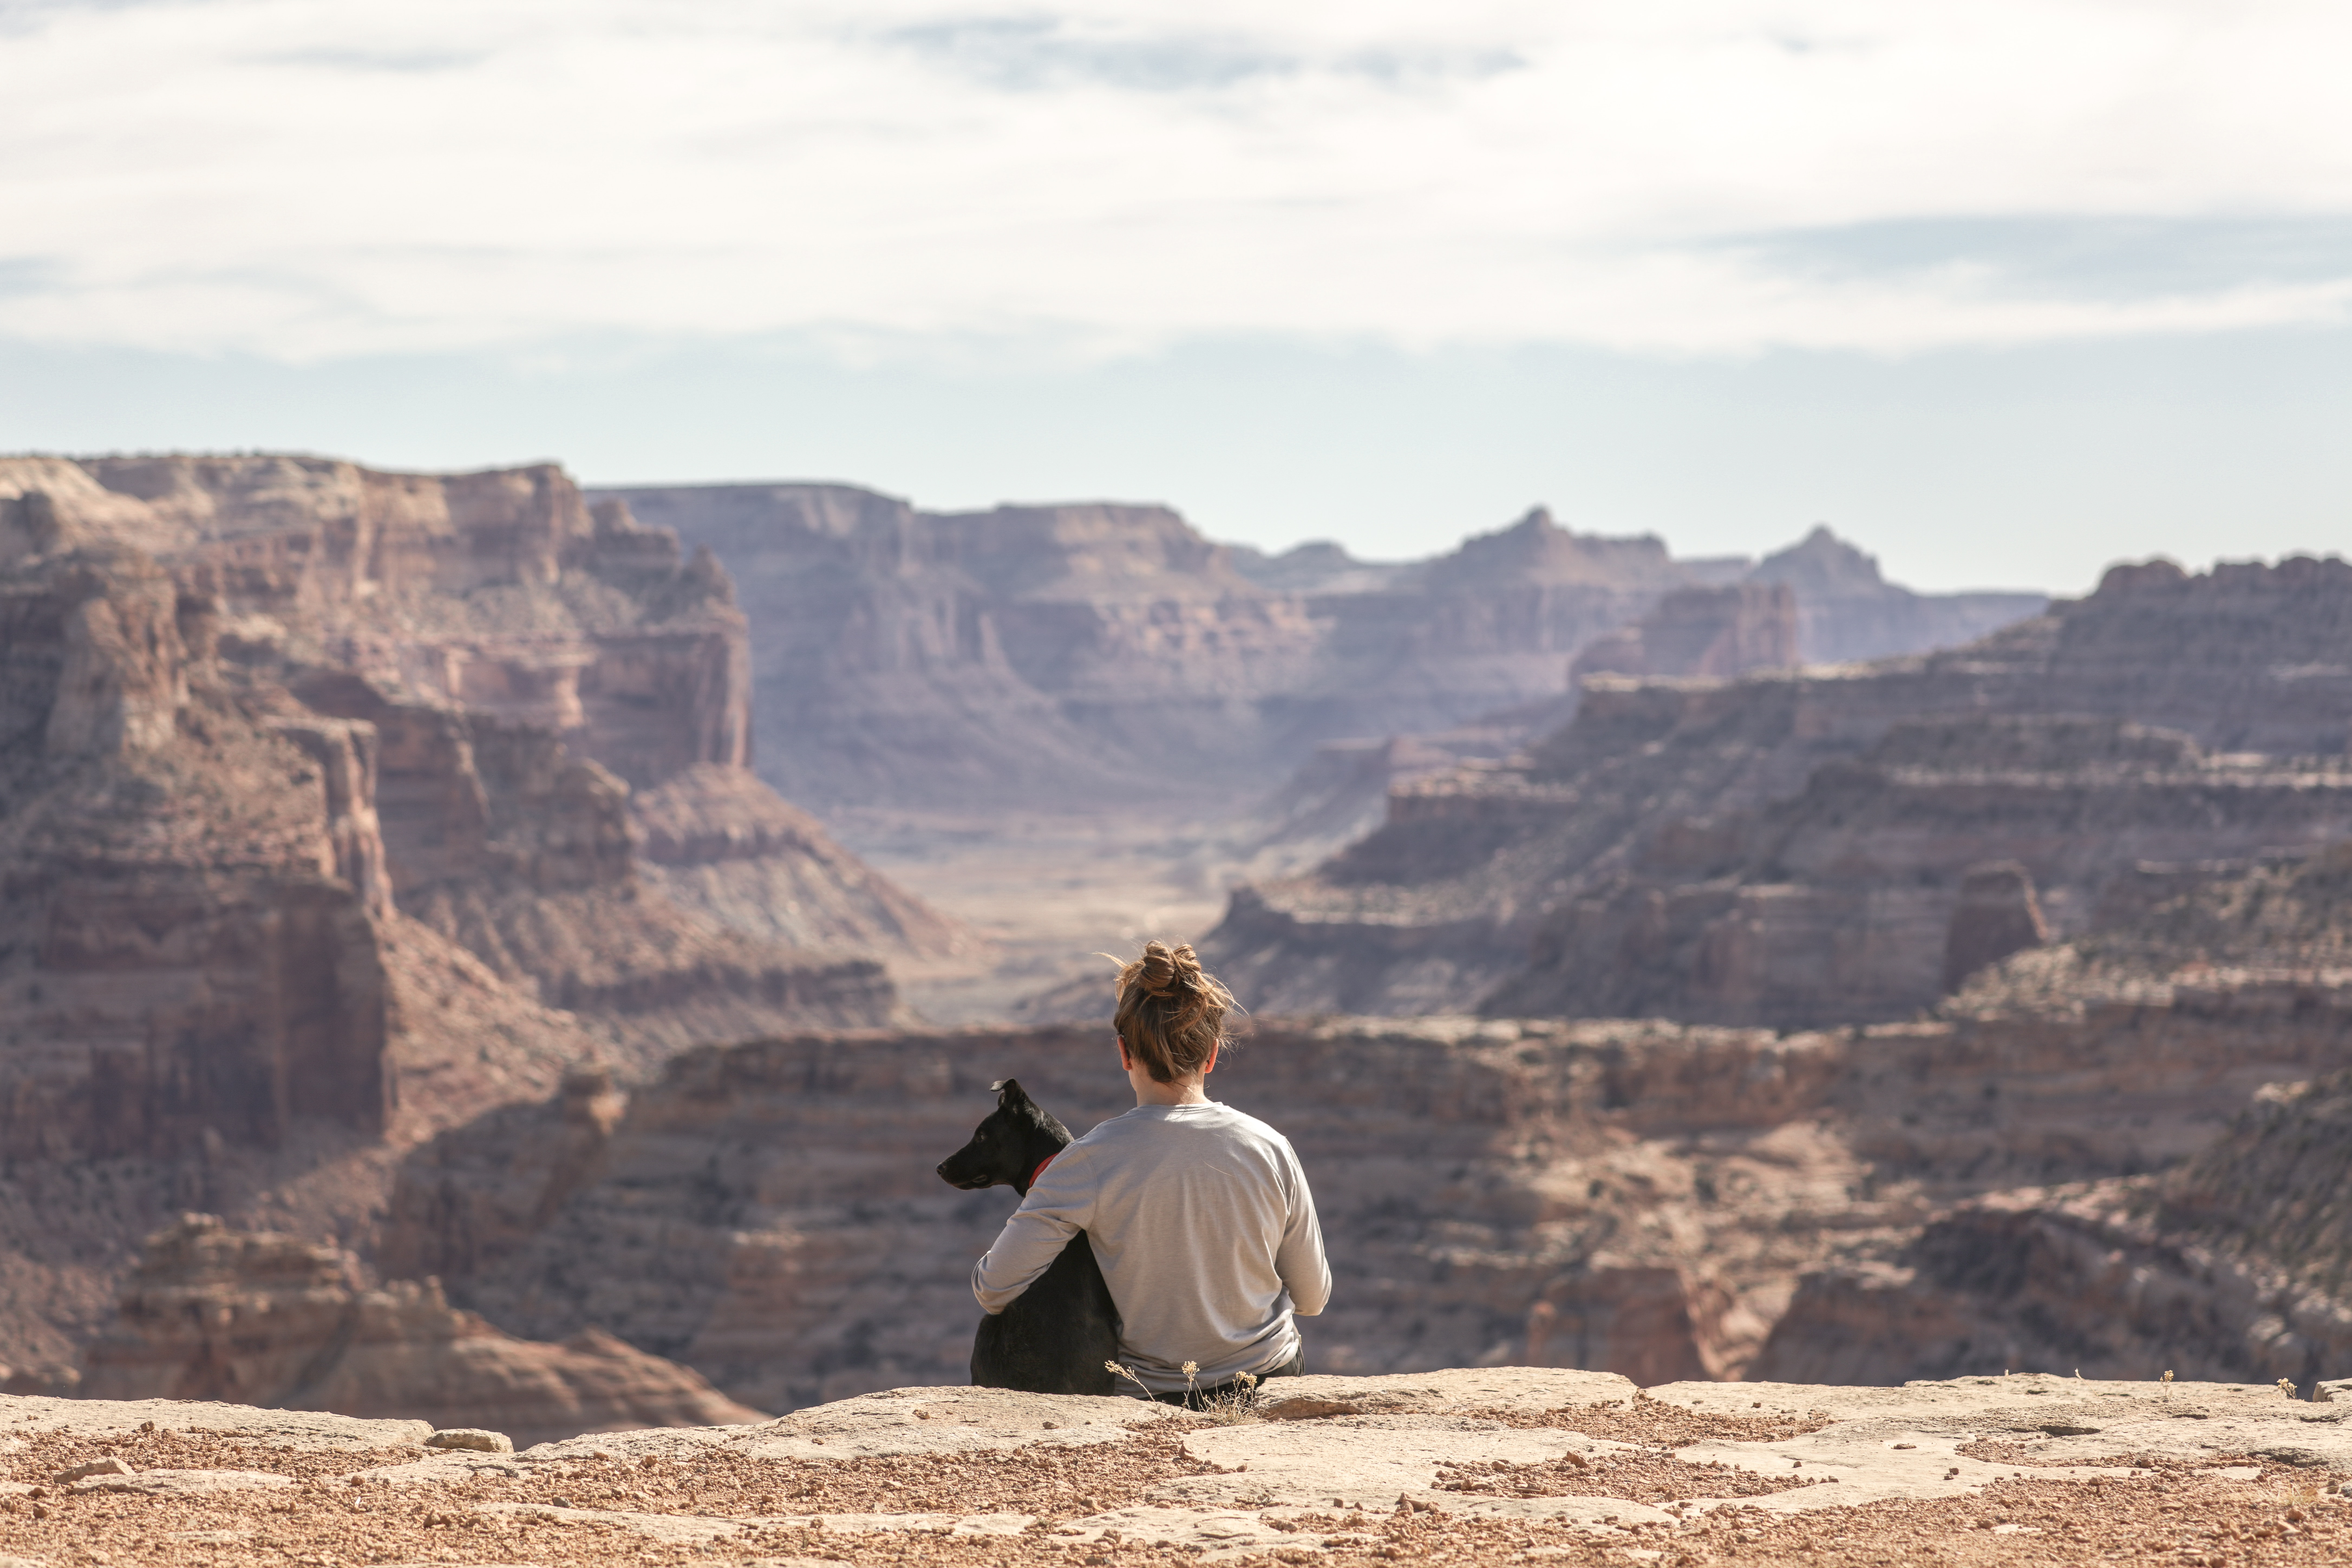 Dog and its owner sitting over a cliff overlooking a canyon